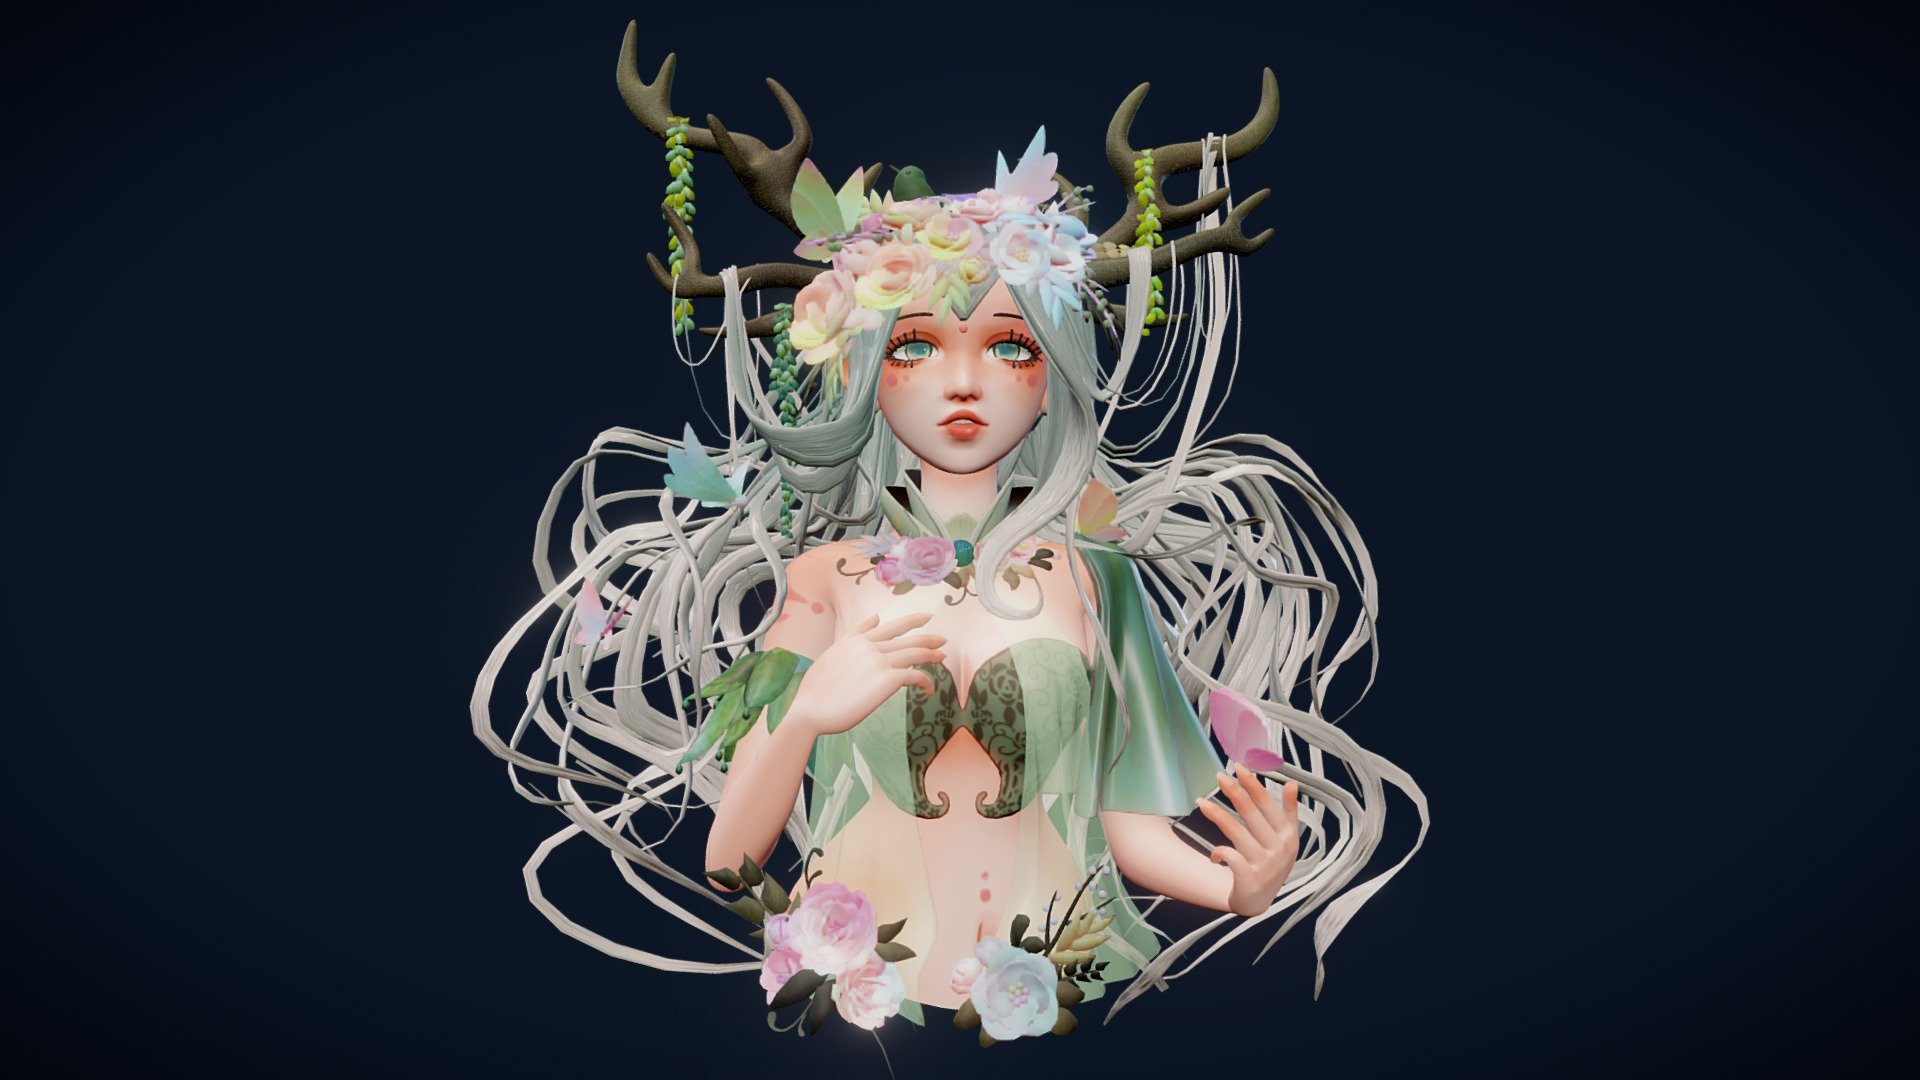 Excited to share my latest stylized character. I originally intended to go with more flat-shaded style with outlines, but my friends on instagram suggested to go with this version with softer colors! :)

Rendered images on Blender are available on my instagram page too!

3D rendition of the alluring illustration &ldquo;The Forest Maiden